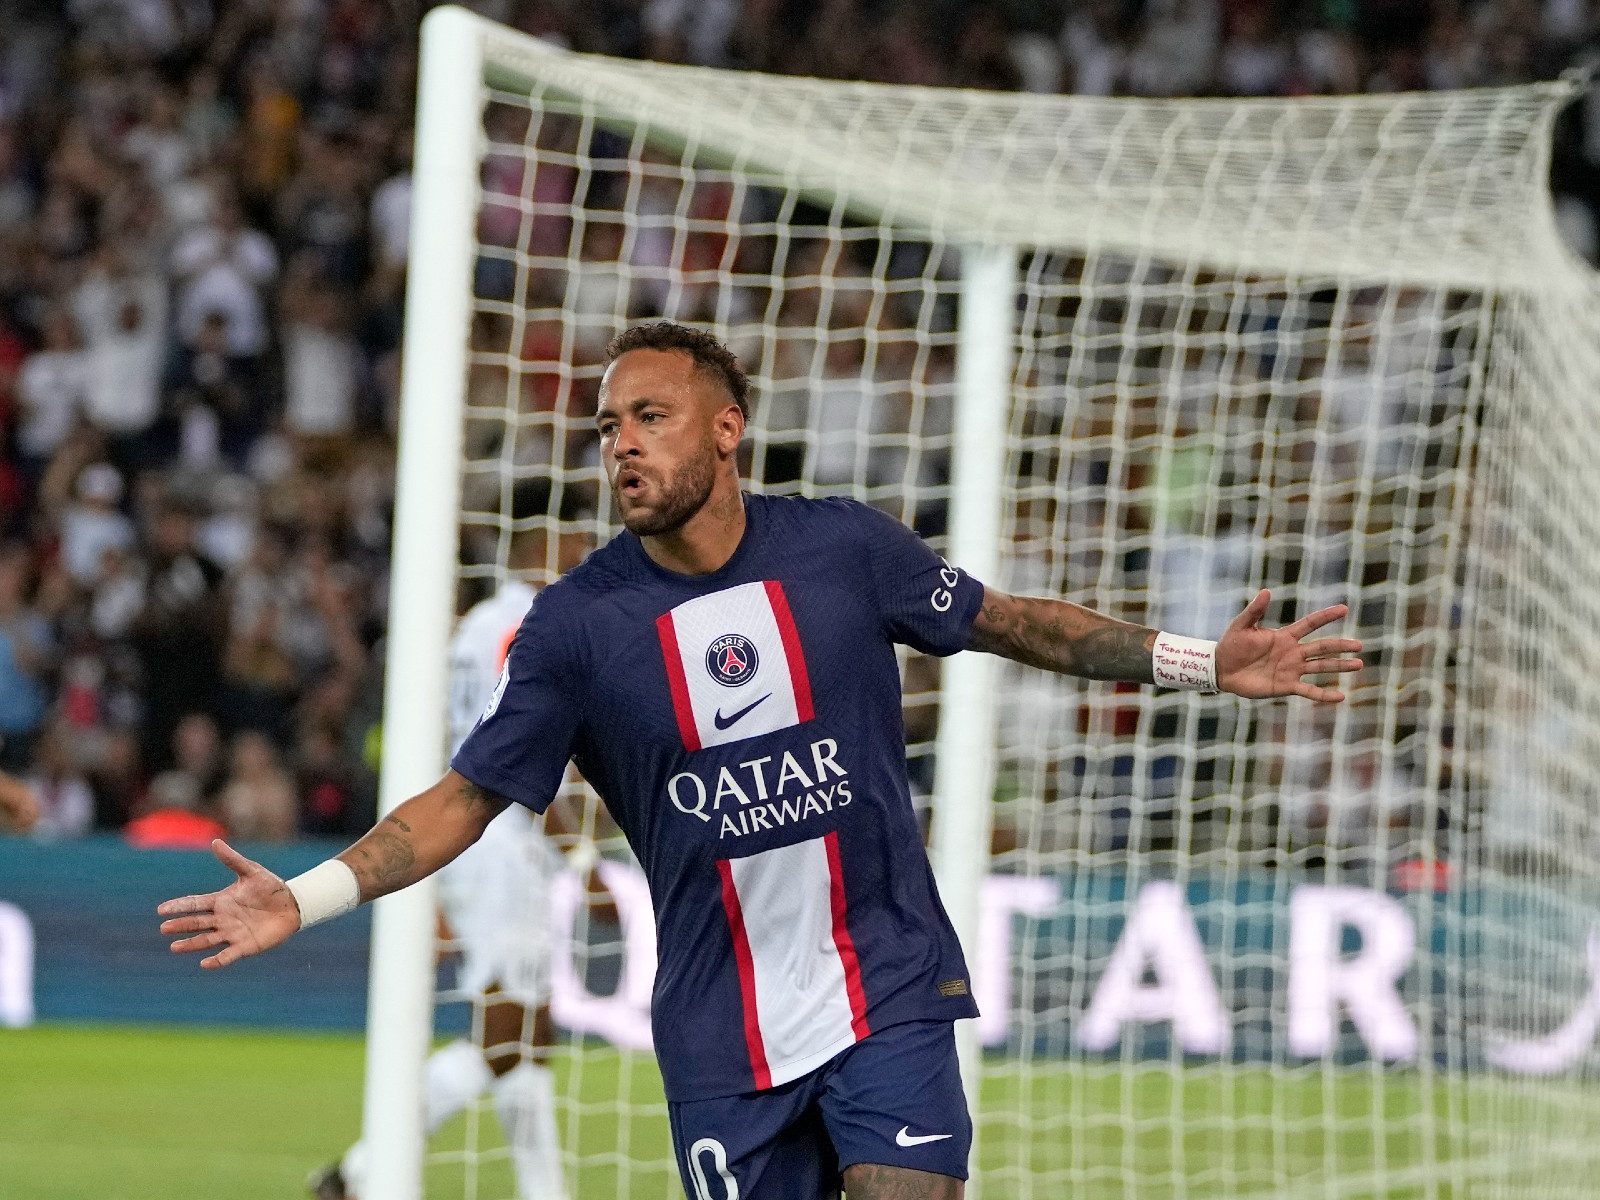 Ligue1: Neymar Double Leads PSG to Thumping Win Over Montpellier